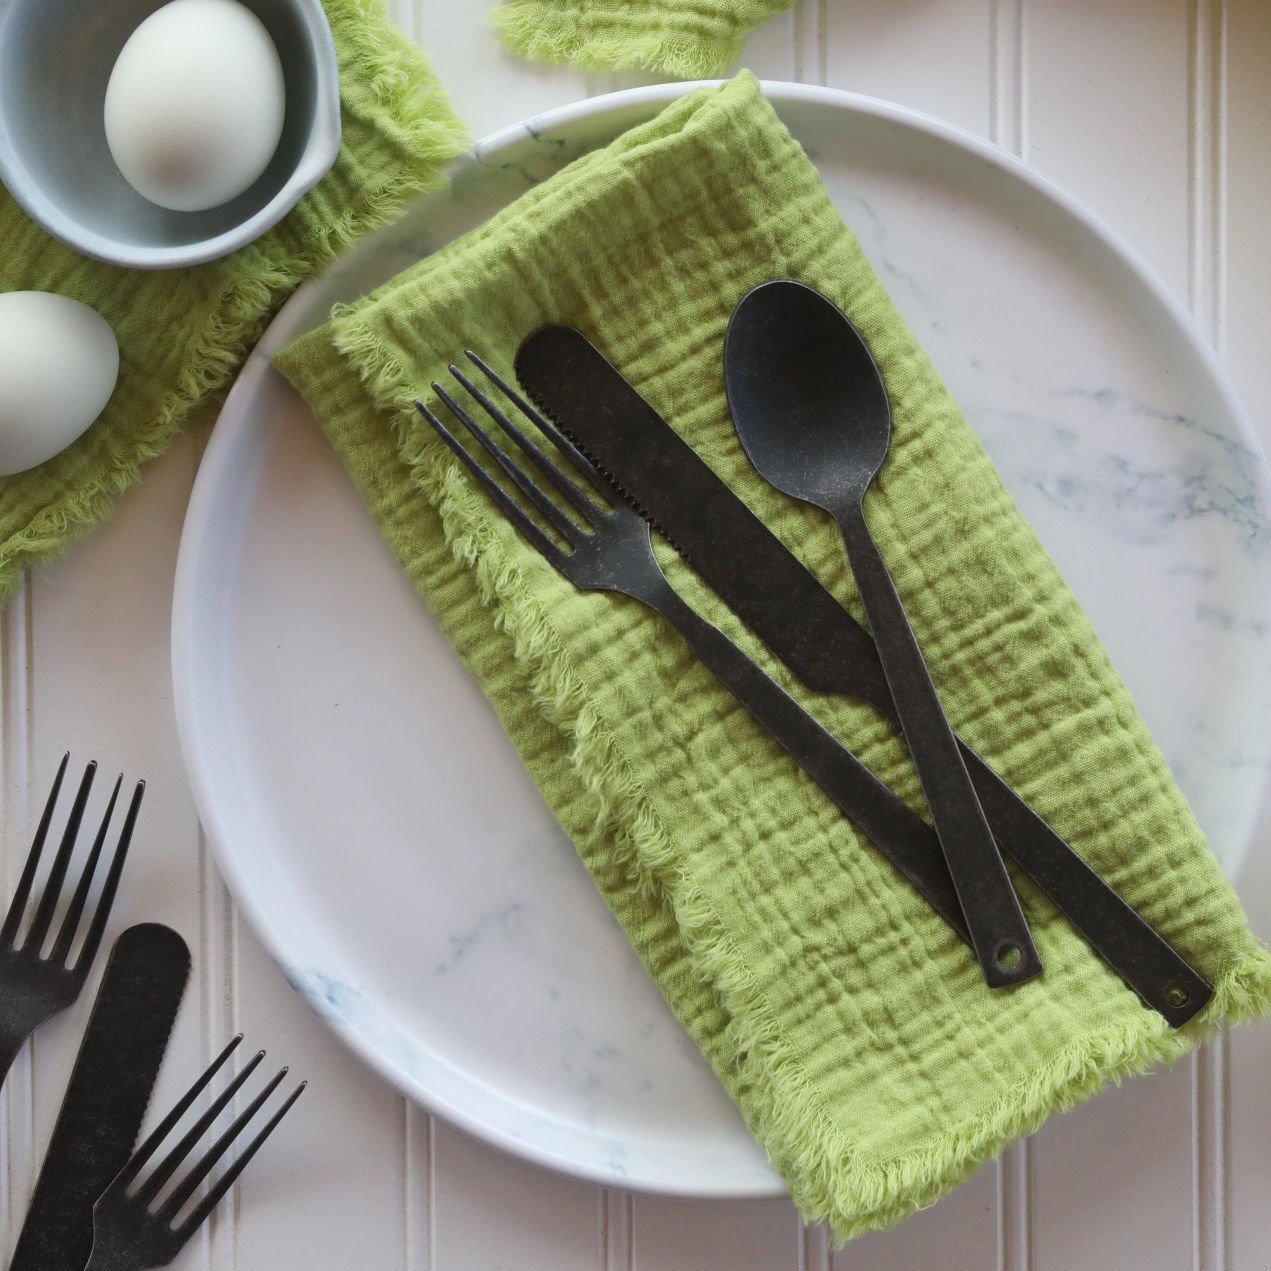 Looking for the perfect black flatware to match your dinnerware set? Our flatware is designed to complement any color and style of tableware, so you can create a cohesive and stunning look no matter what.